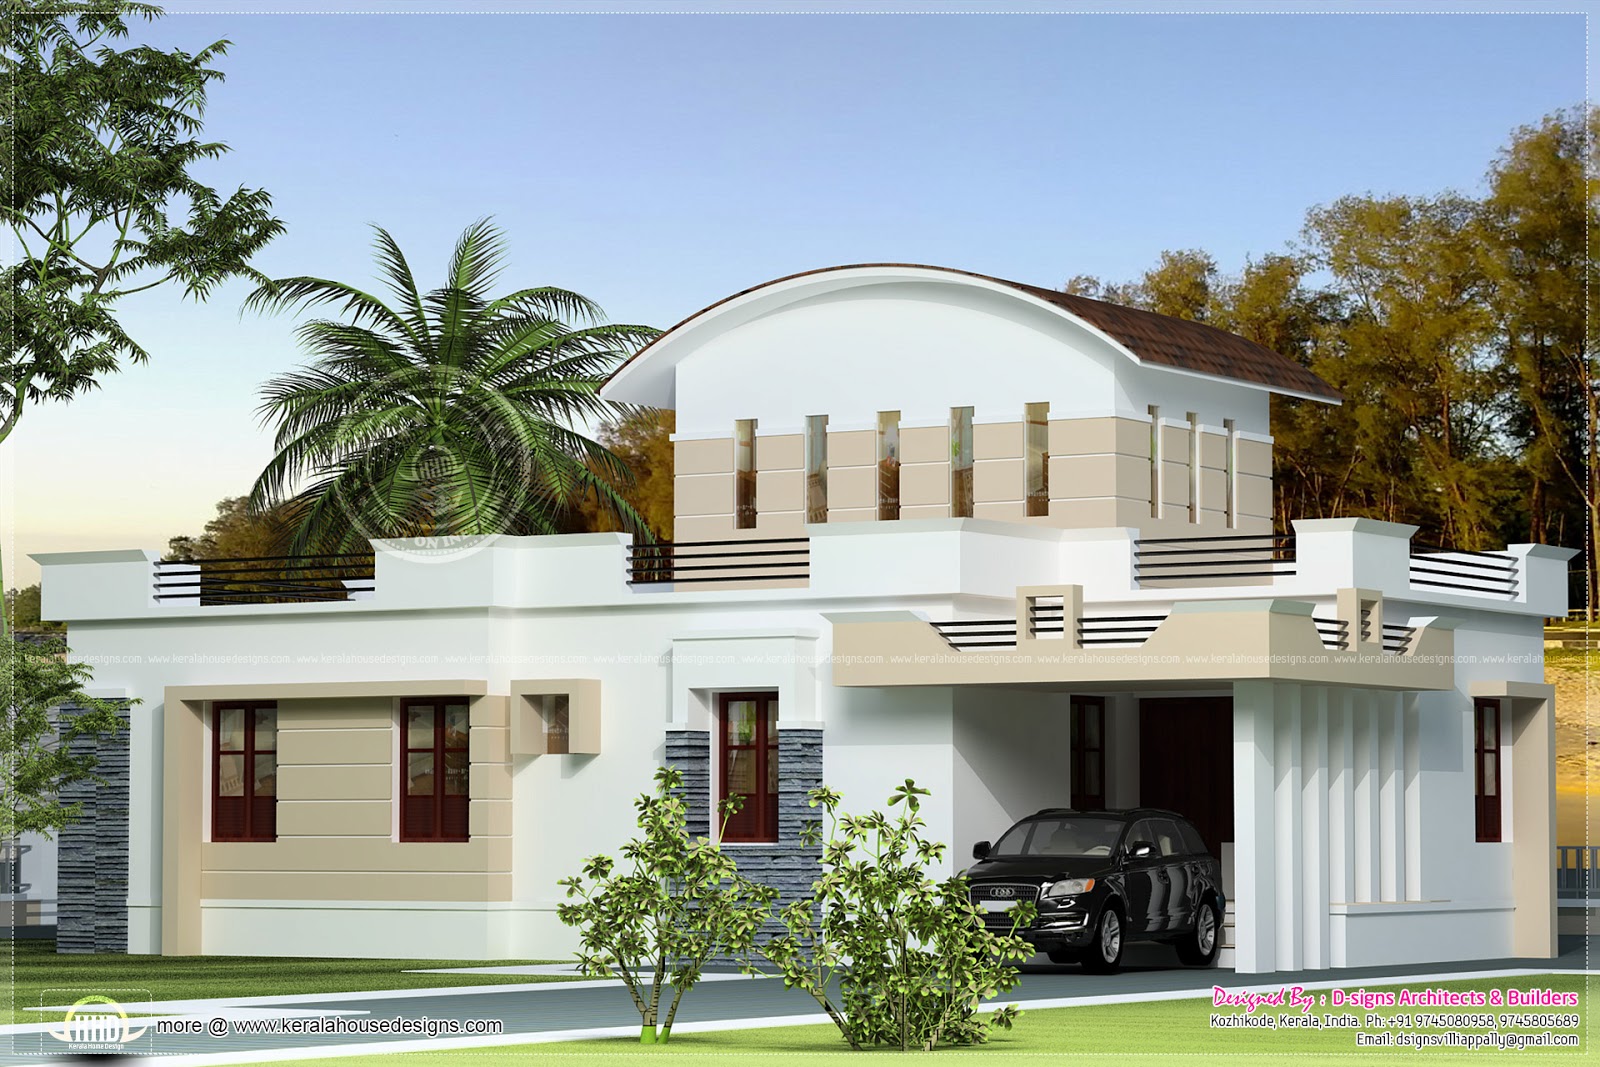  Small  budget  Kerala home  with staircase room House  